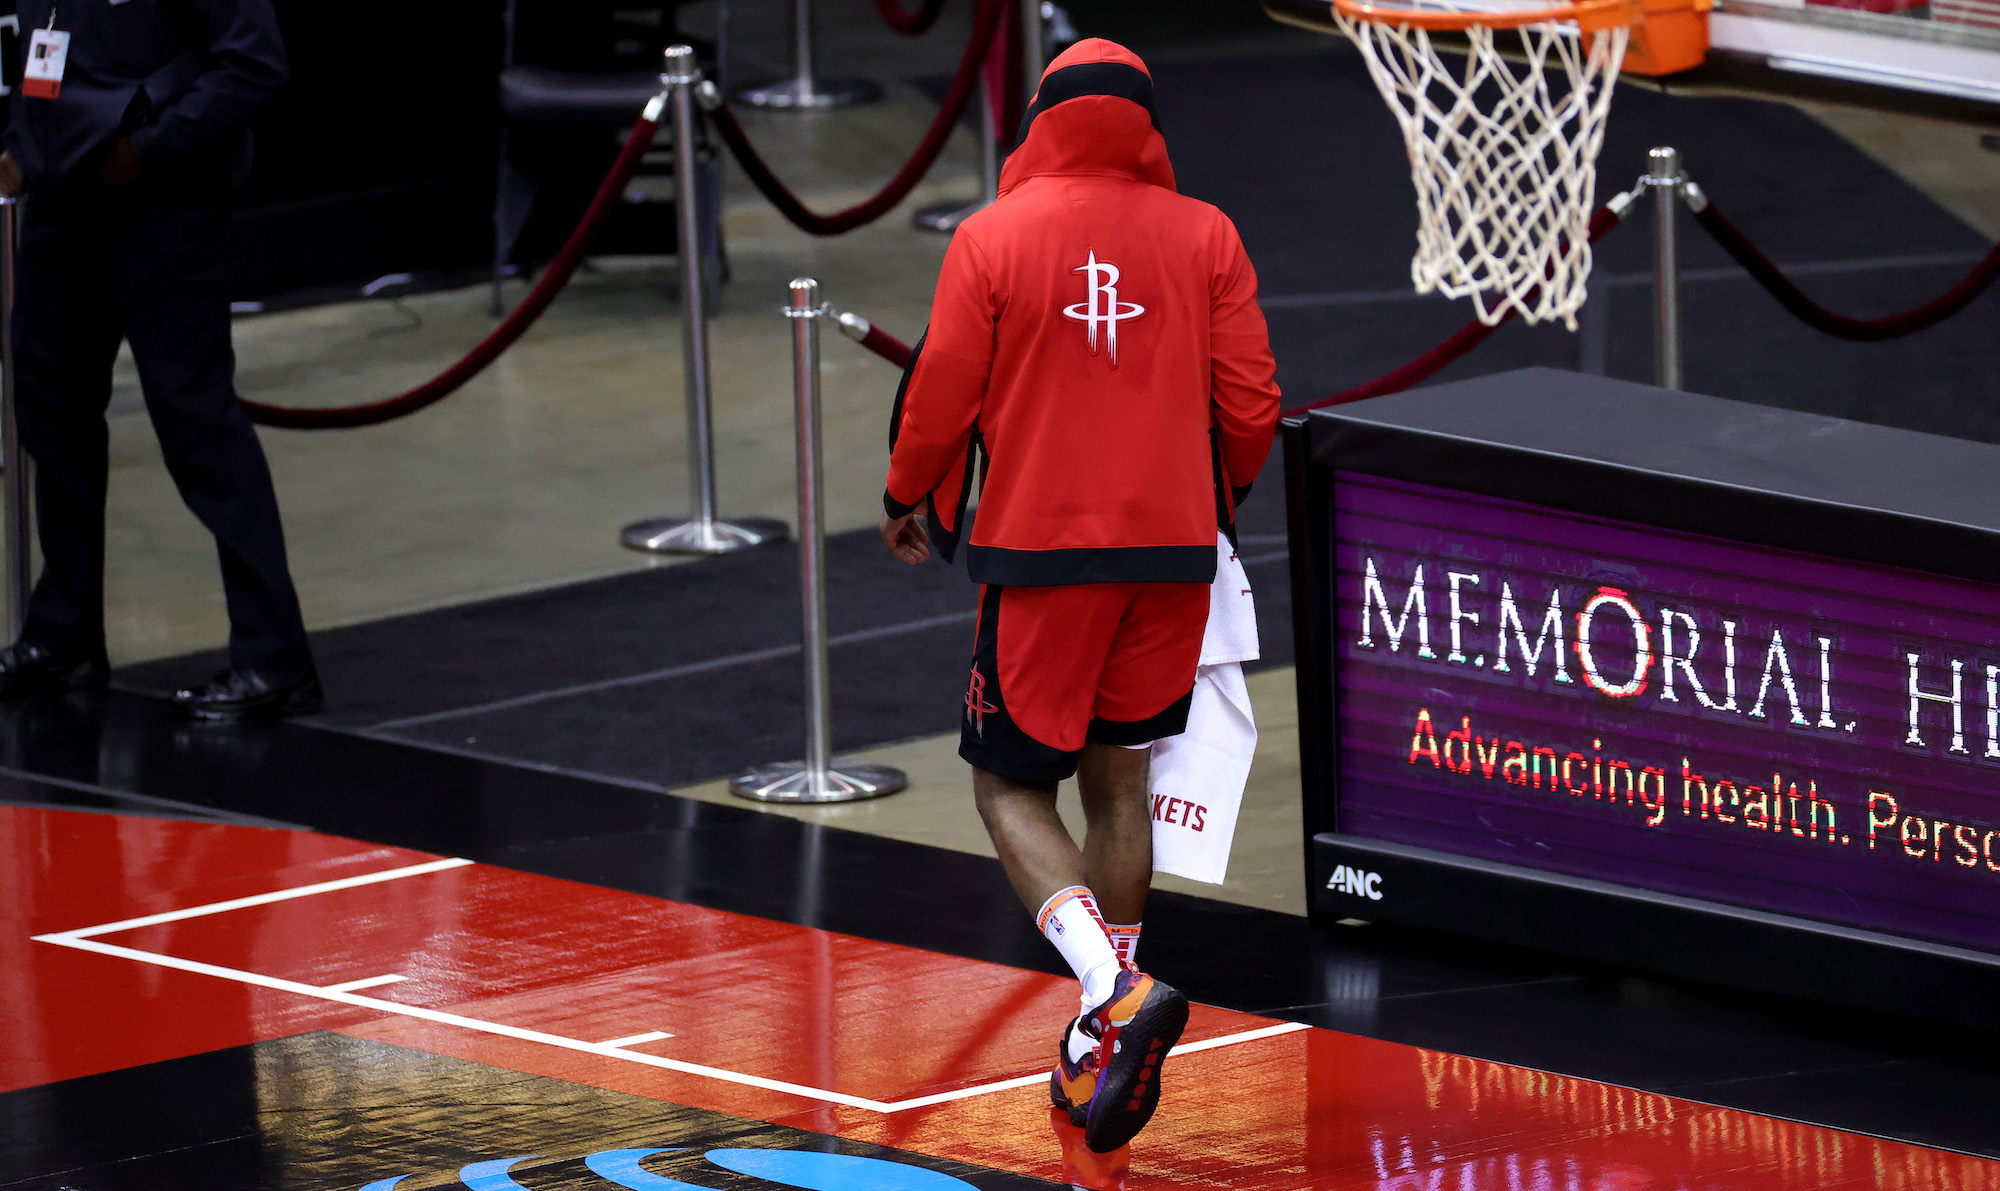 HOUSTON, TEXAS - JANUARY 10: James Harden #13 of the Houston Rockets leaves the court following the 120 -102 loss to the Los Angeles Lakers at Toyota Center on January 10, 2021 in Houston, Texas. NOTE TO USER: User expressly acknowledges and agrees that, by downloading and or using this photograph, User is consenting to the terms and conditions of the Getty Images License Agreement. (Photo by Carmen Mandato/Getty Images)